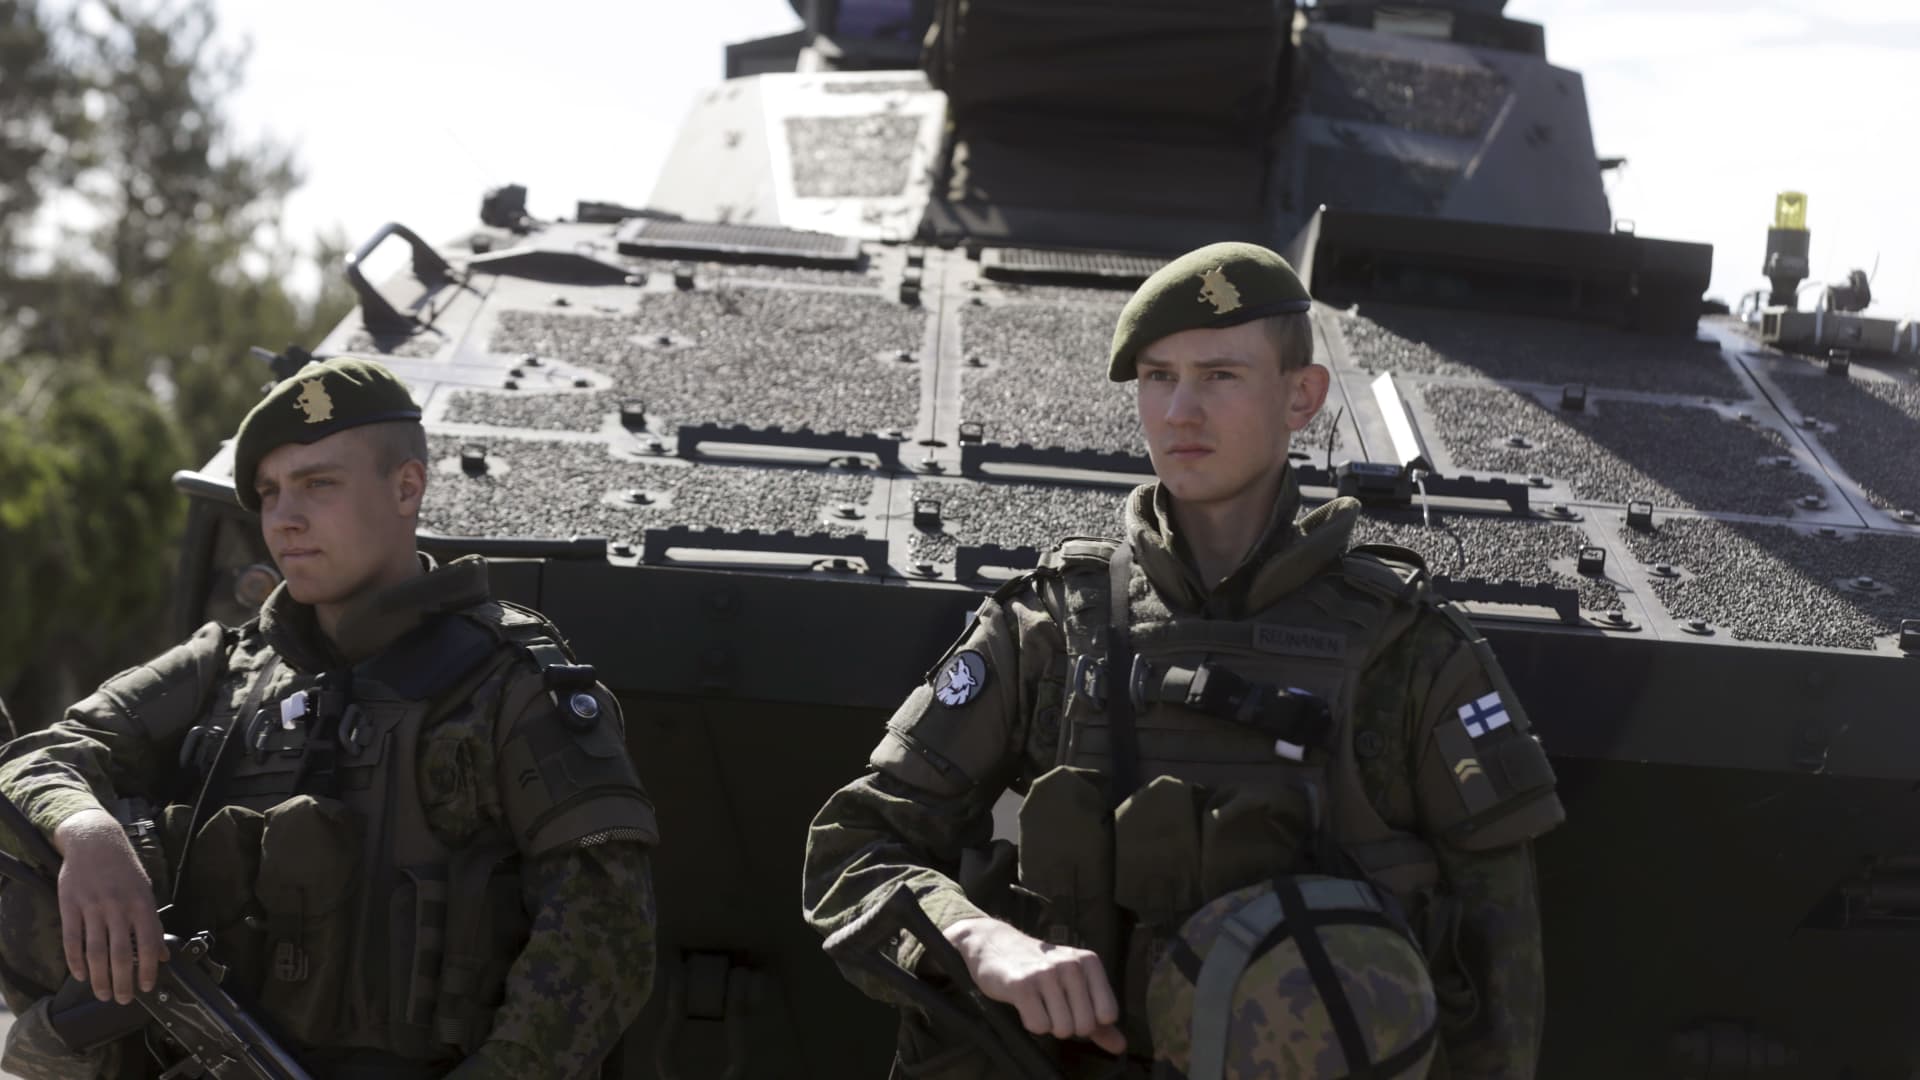 Finland's army soldiers attend the multinational NATO exercise Saber Strike in Adazi, Latvia, June 11, 2015.